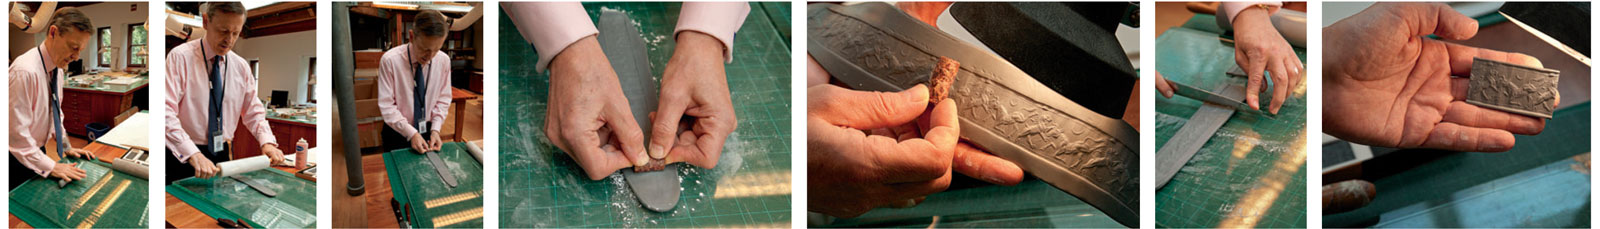 How to leave good impressions, Mesopotamian style: Sidney Babcock starts by kneading the clay and removing any air bubbles before using a marble roller to make a strip of even width and thickness. A sprinkle of silica powder acts like flour on baking dough—it prevents the clay from sticking to the seal. With the seal held between his forefingers, he now uses his thumbs to apply strong, even pressure as he rolls the seal down the clay. The intaglio or “negative” carving produces the image on the clay in a “positive” relief that can then be trimmed.